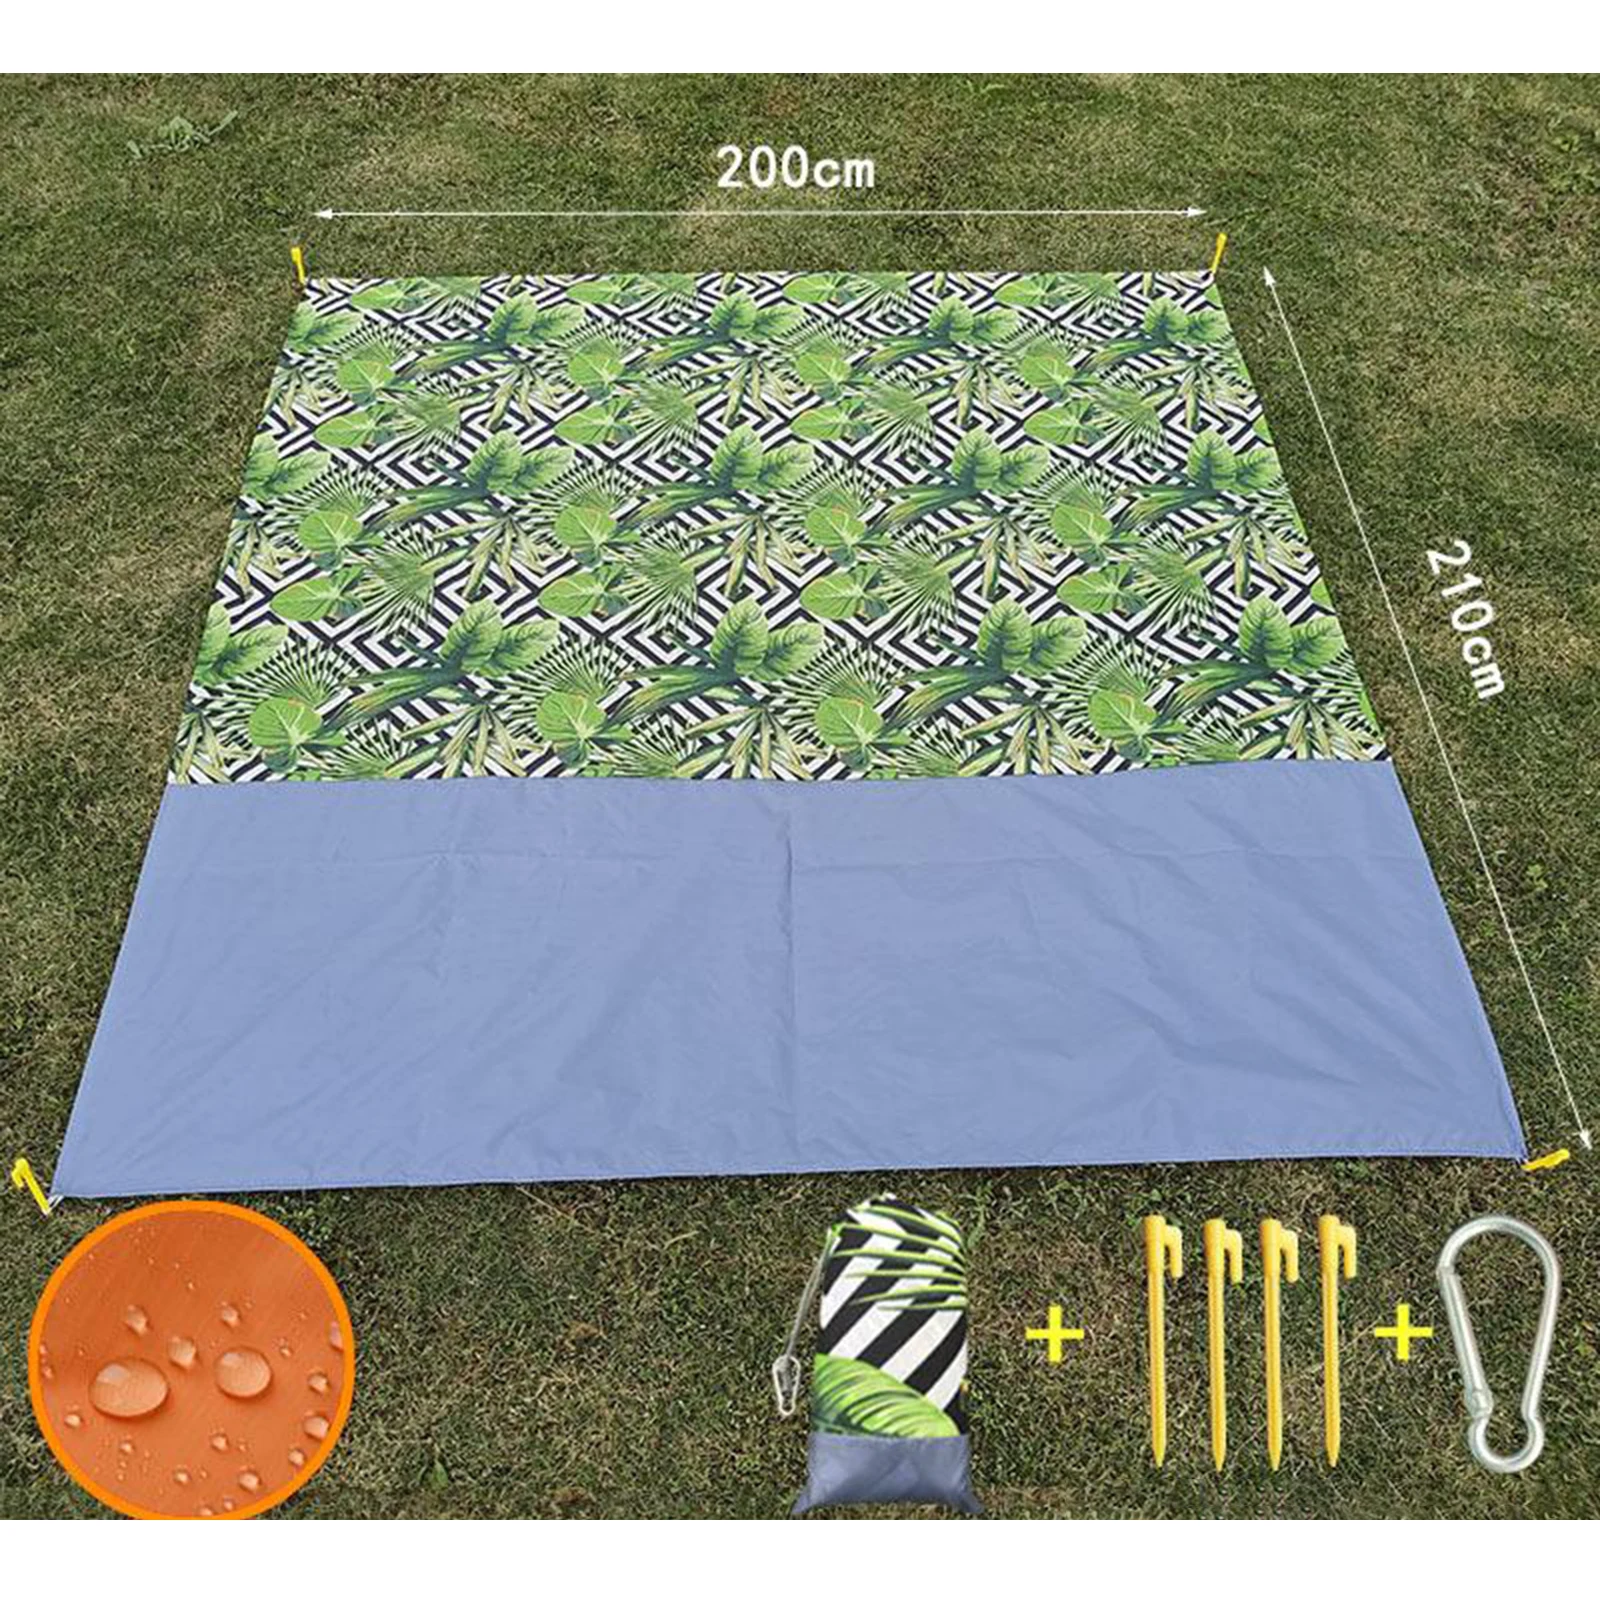 Waterproof Beach Camping Pad for Outdoors Picnic Barbecue Travel Rug Blanket